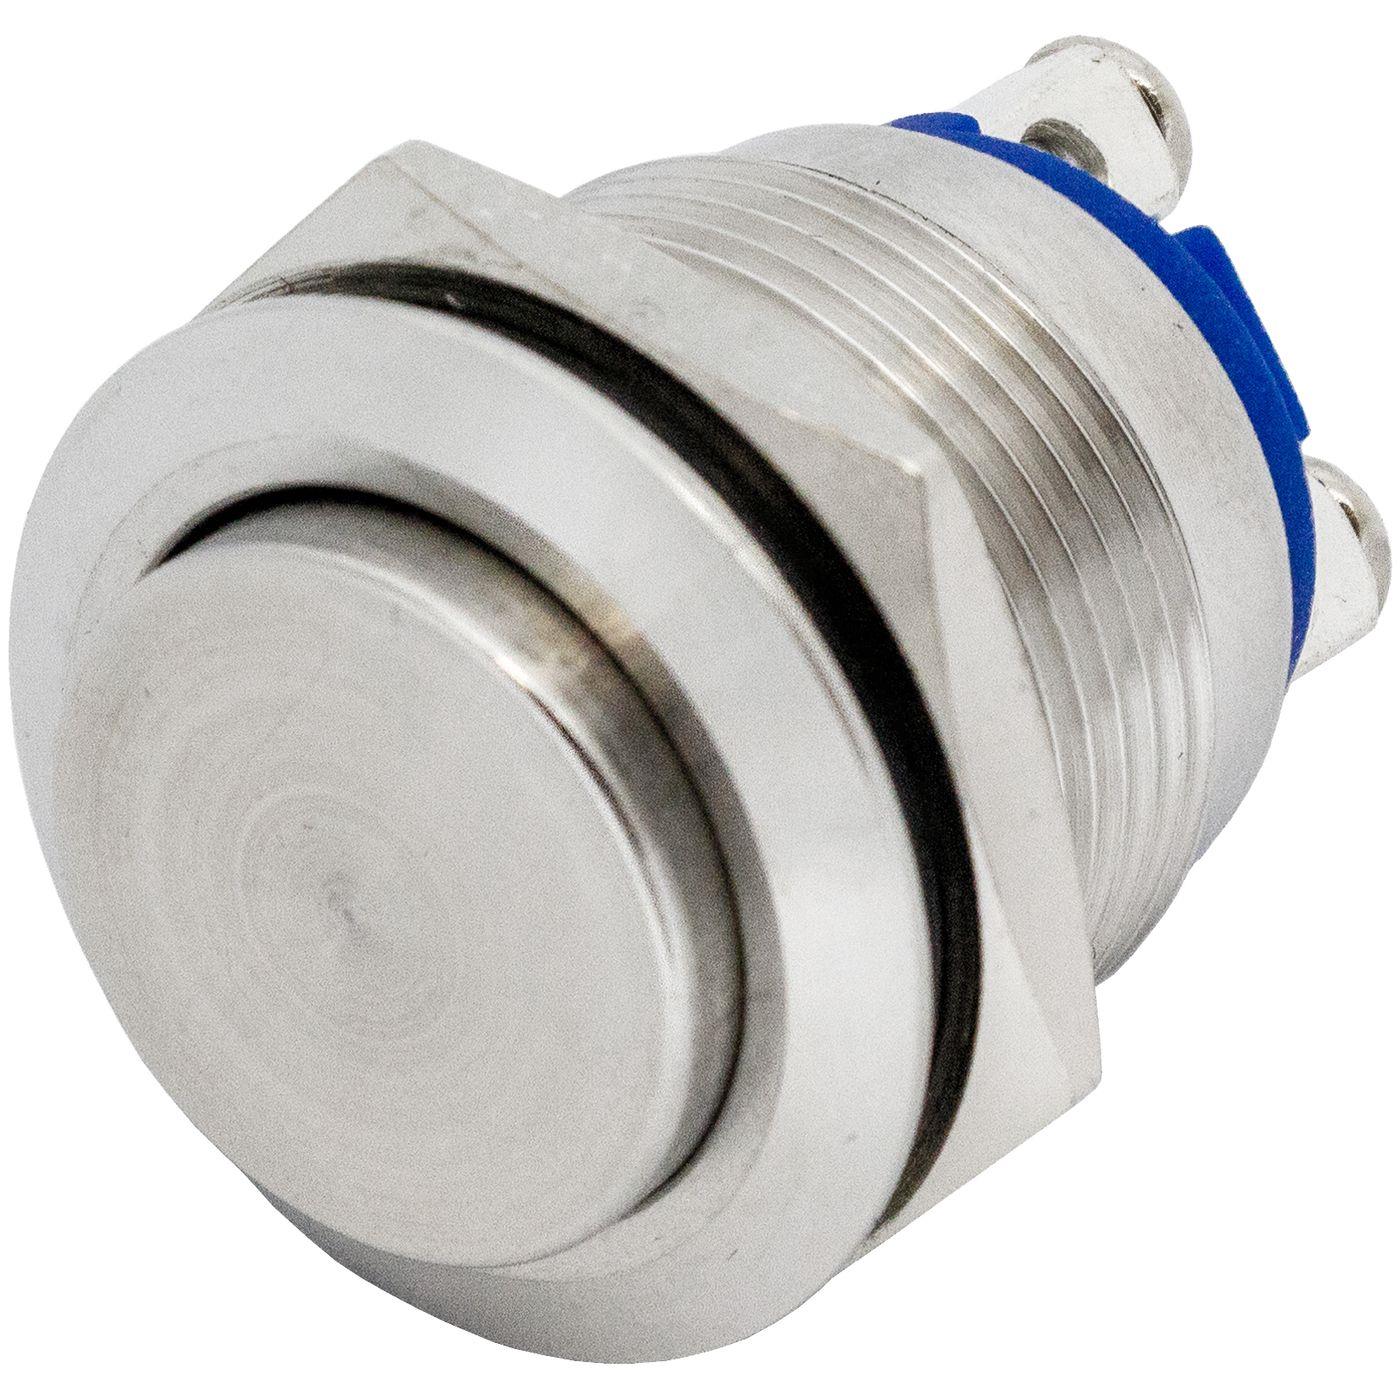 Stainless steel Push button raised Ø16mm IP65 Screw Connection 250V 3A Vandal-proof